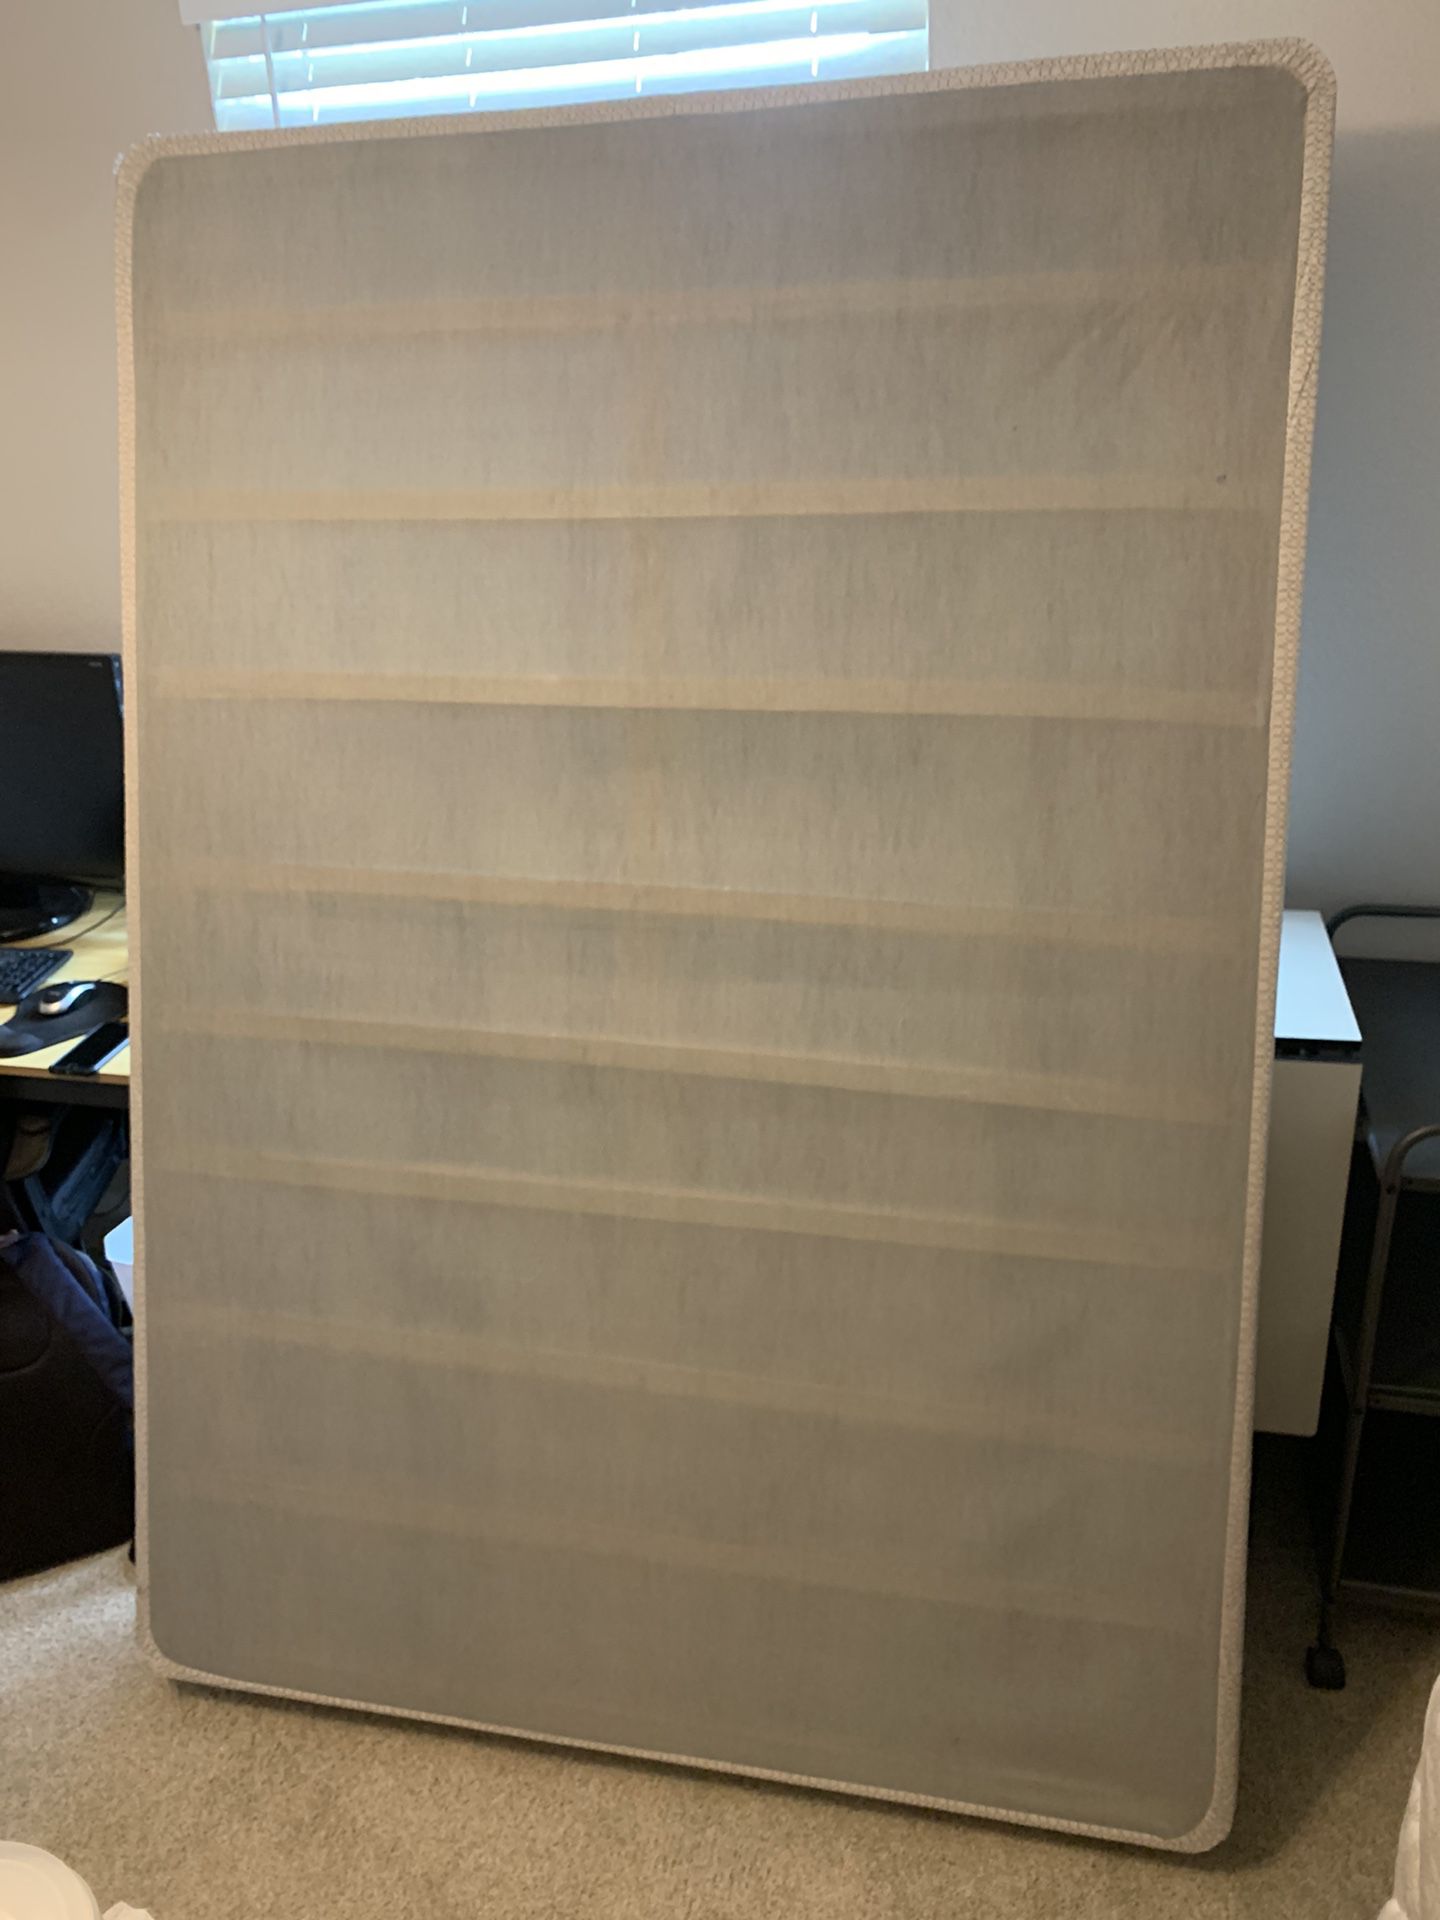 A Full-Size Mattress, Box Spring, and Frame